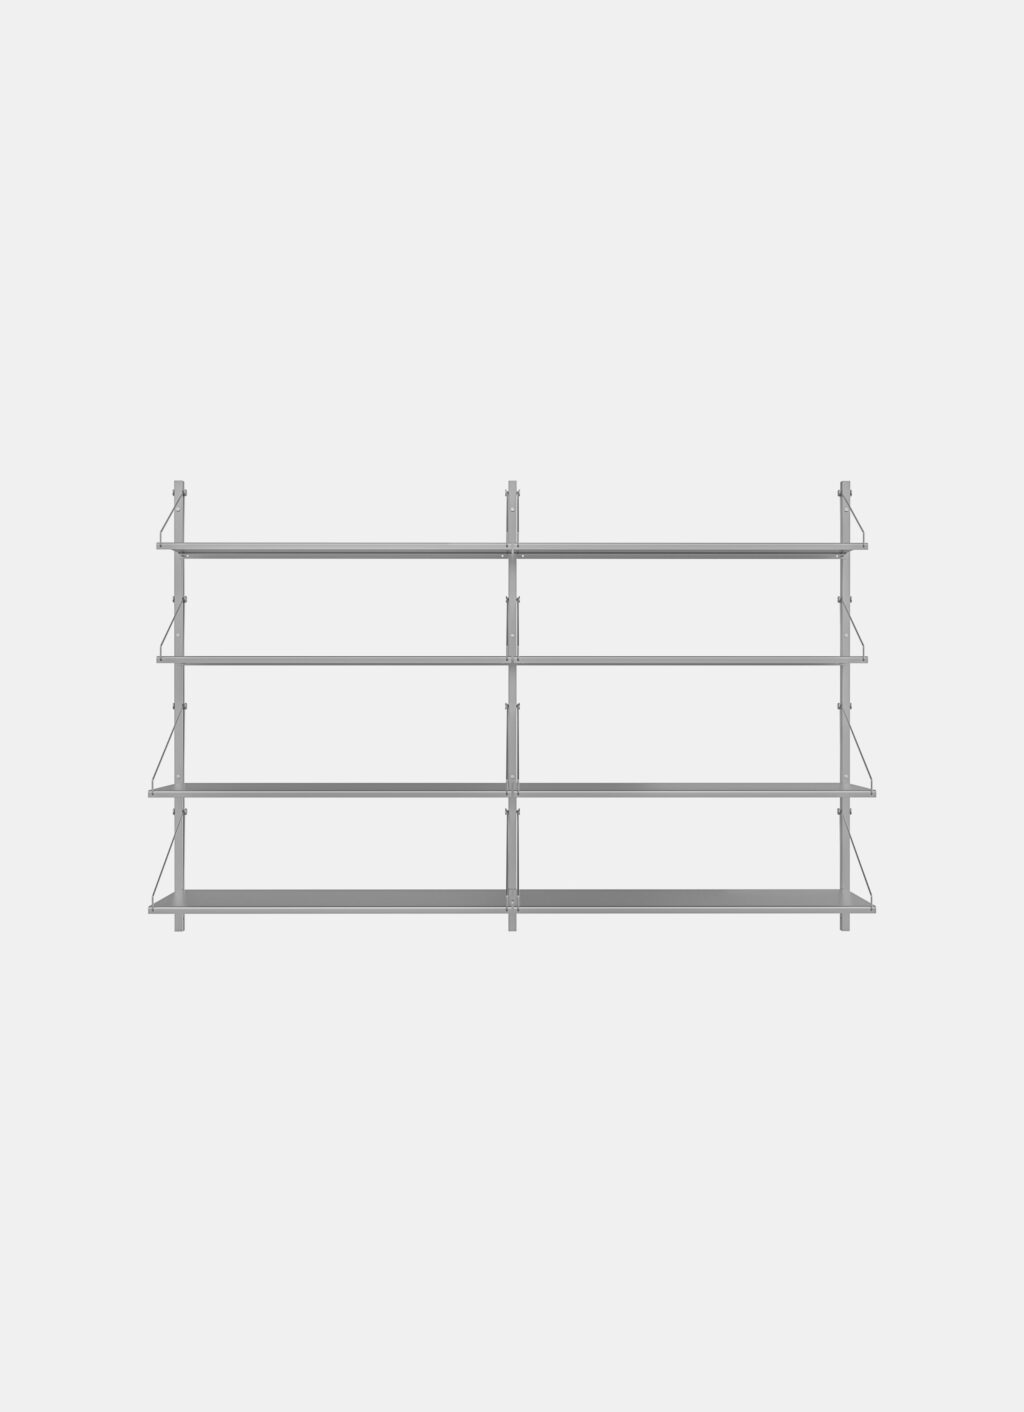 Frama - Shelf Library - Stainless Steel - H1084 - Double Section